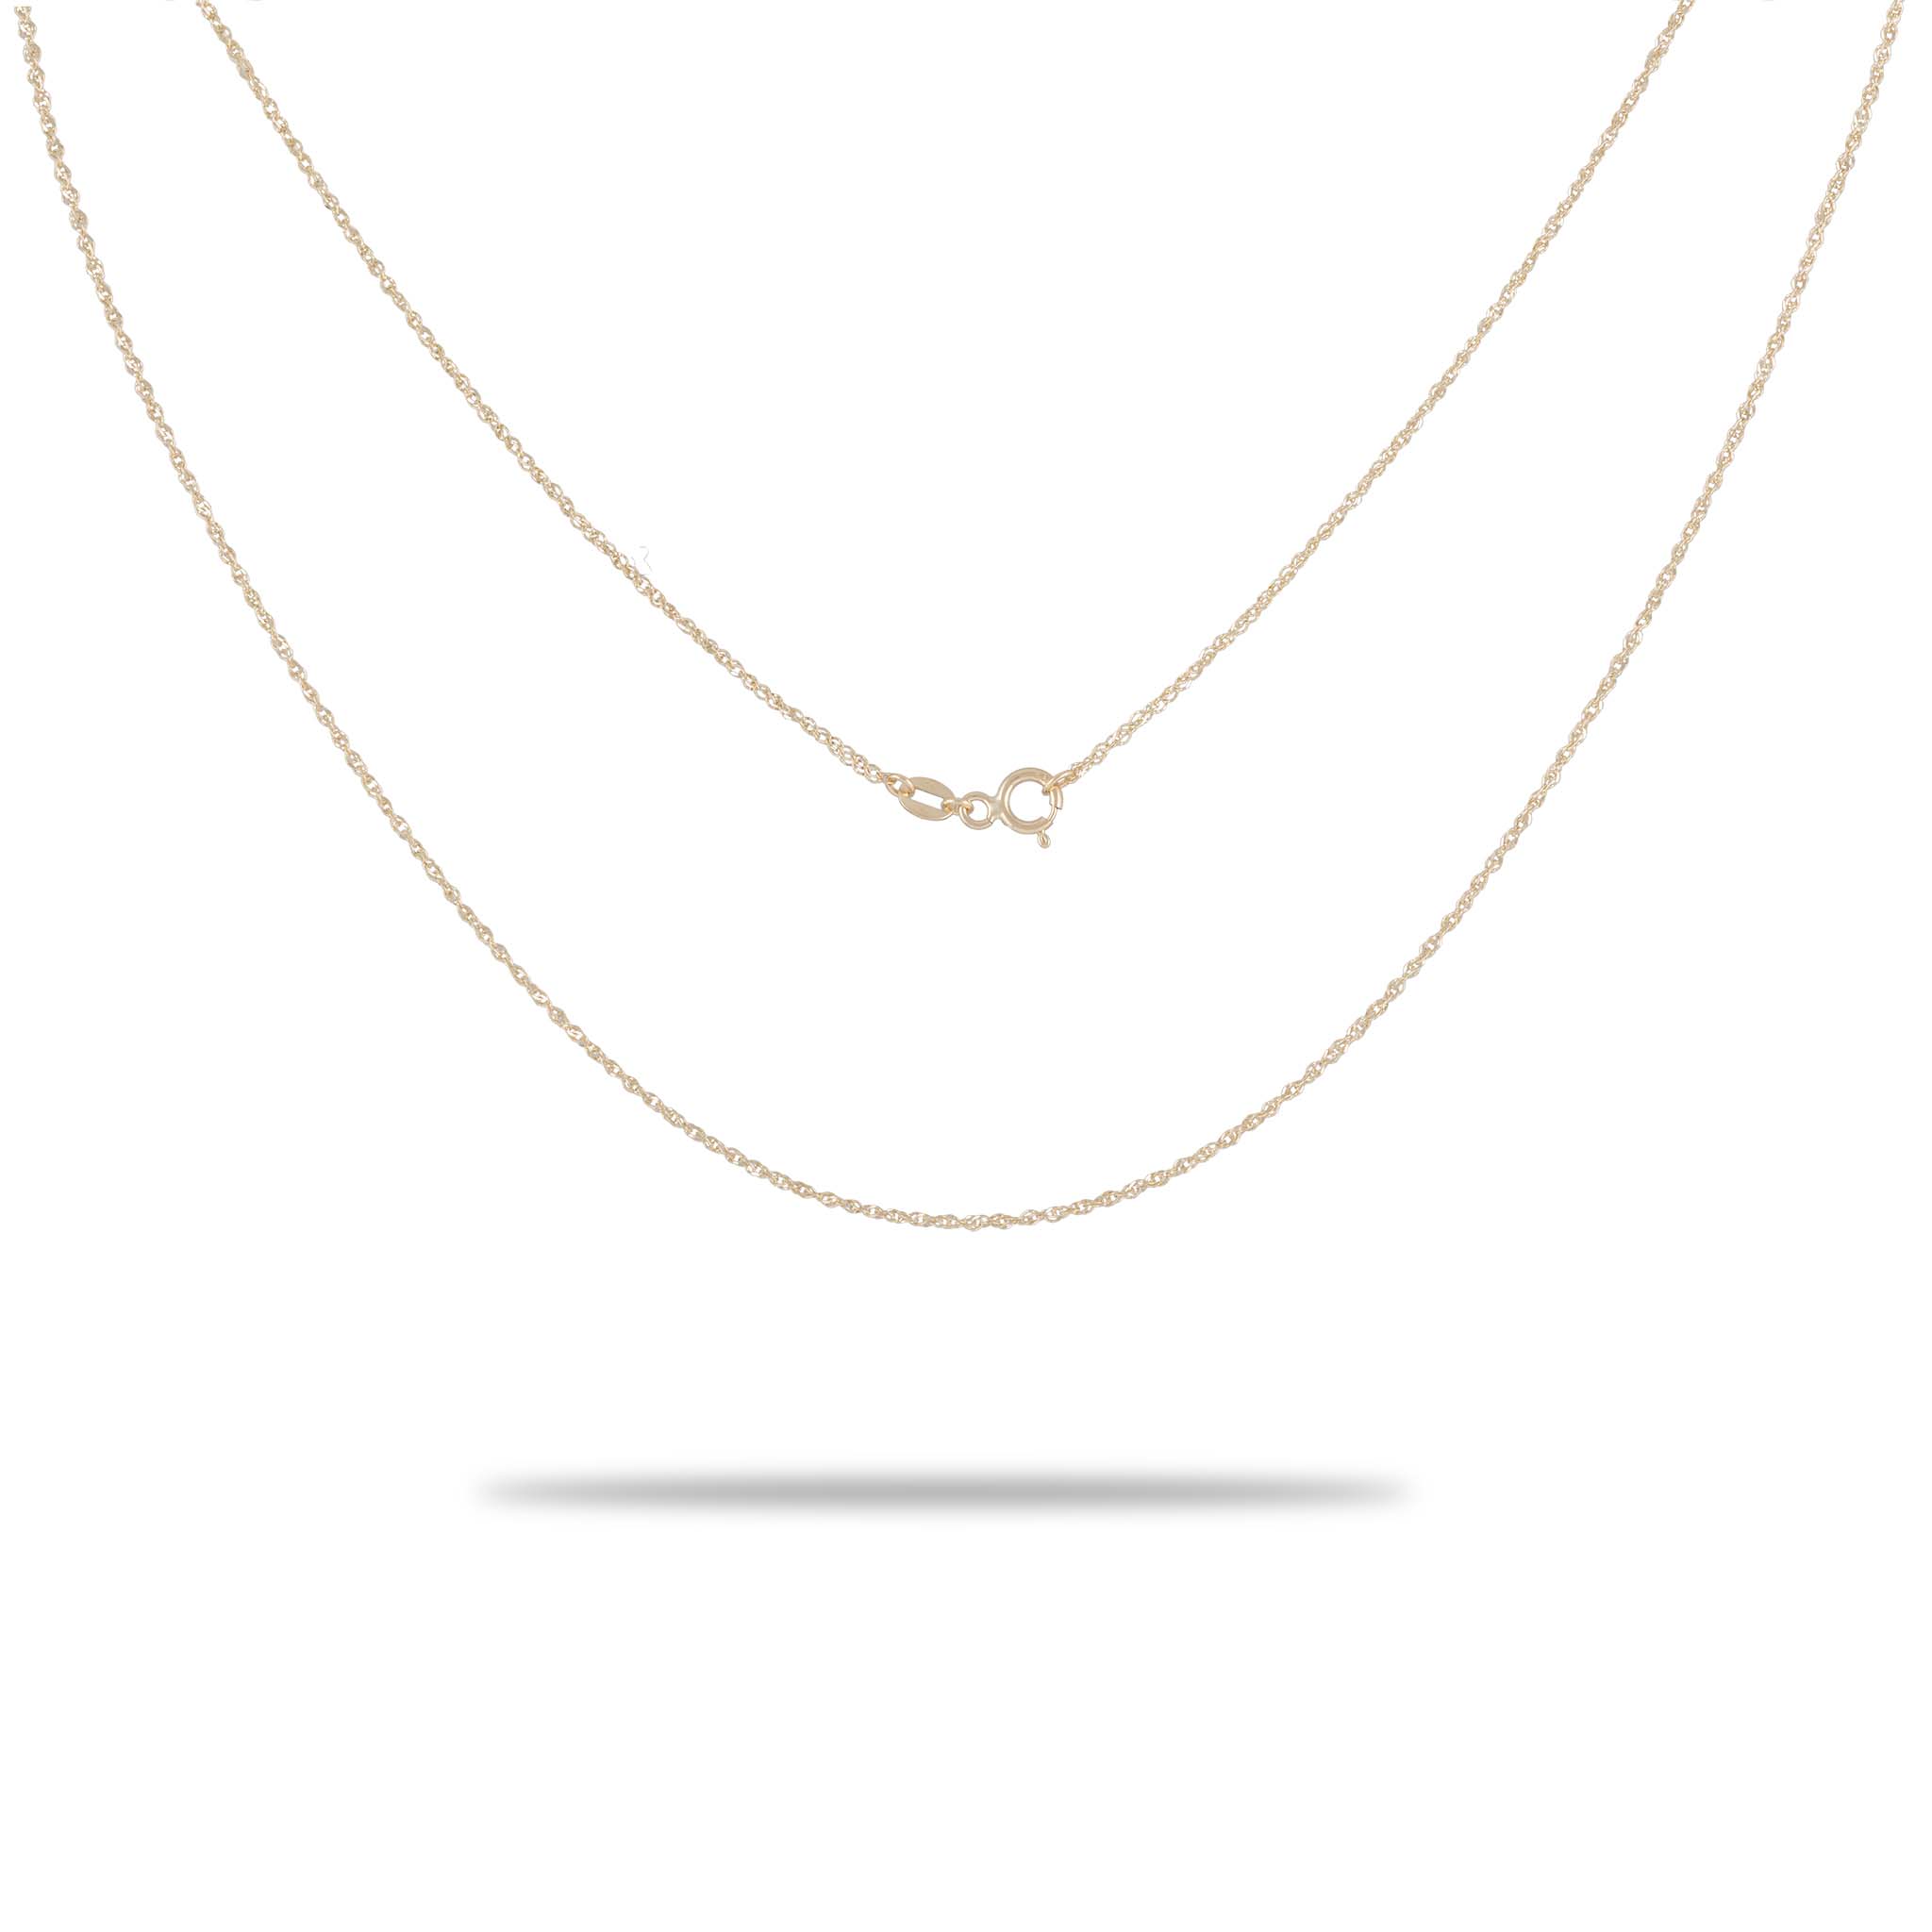 LaViano Jewelers 18K Yellow Gold Mesh Chain - Necklaces